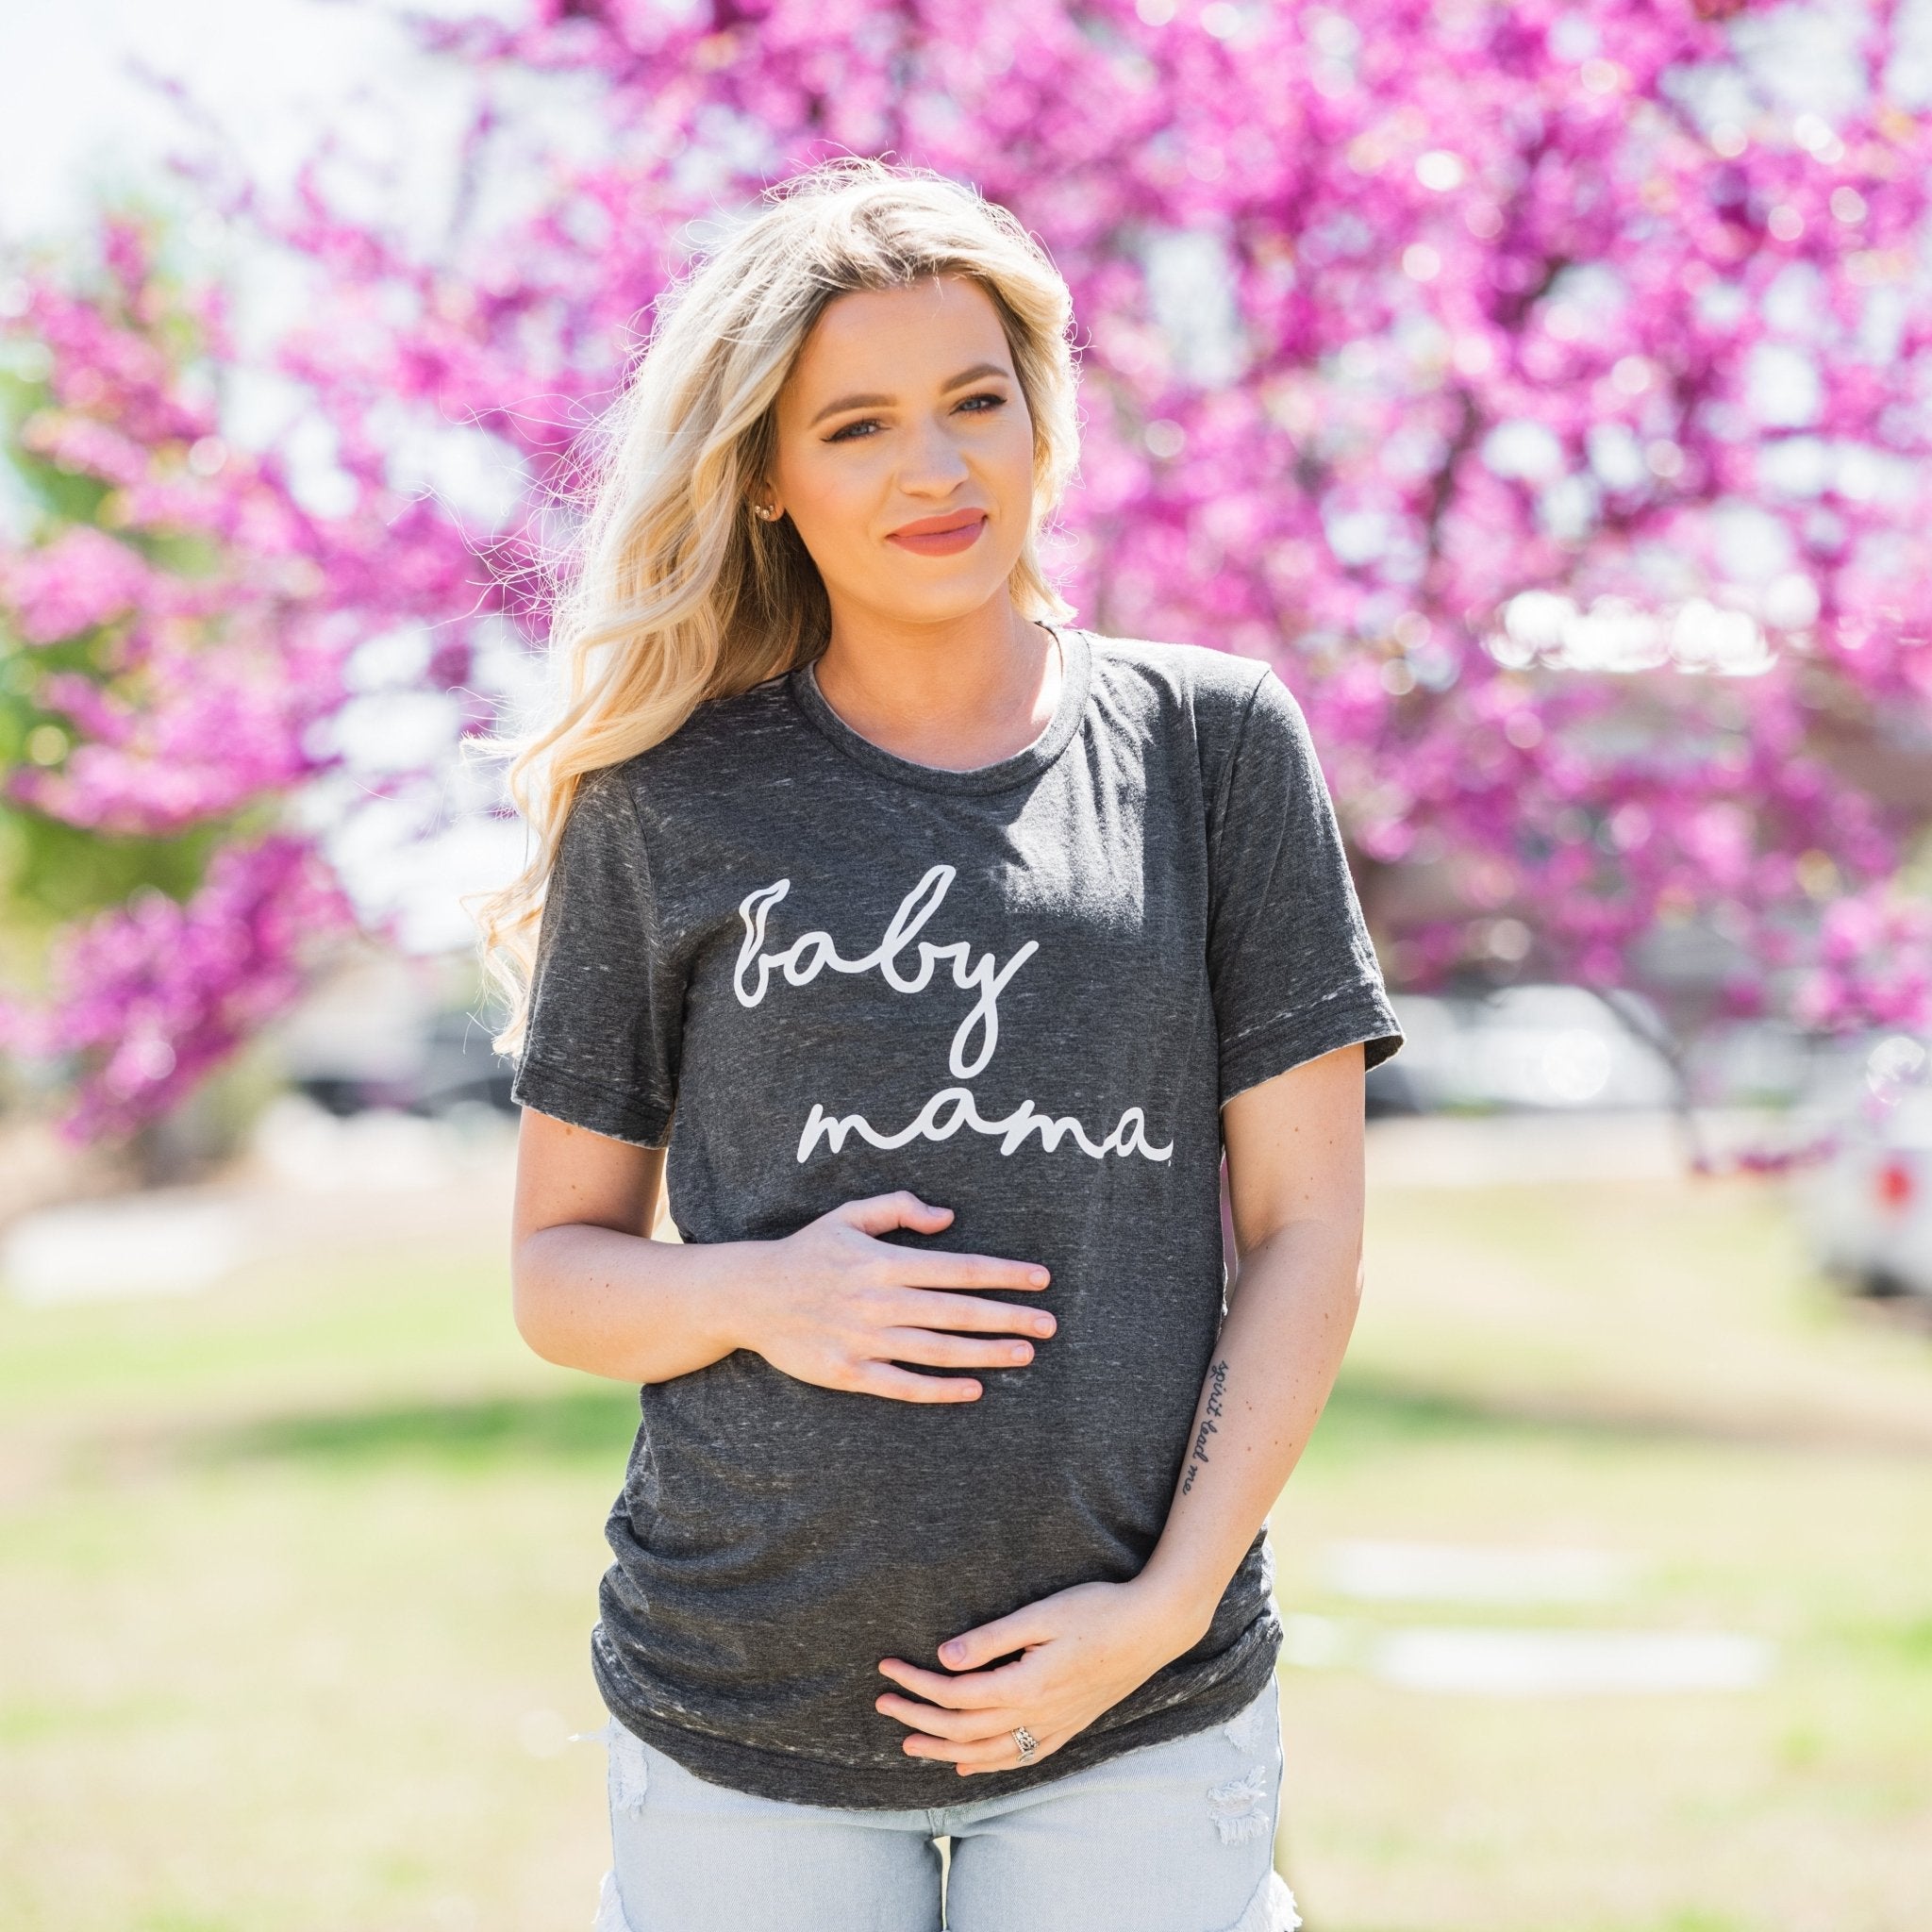 Mom Tees | Lush Fashion Lounge: mom life t shirts, mommy graphic tees, cute graphic tees for moms, cute t shirts for moms, trendy womens boutiques online, cute online womens boutiques. Pregnant model holds belly wearing graphic t-shirt that says baby mama